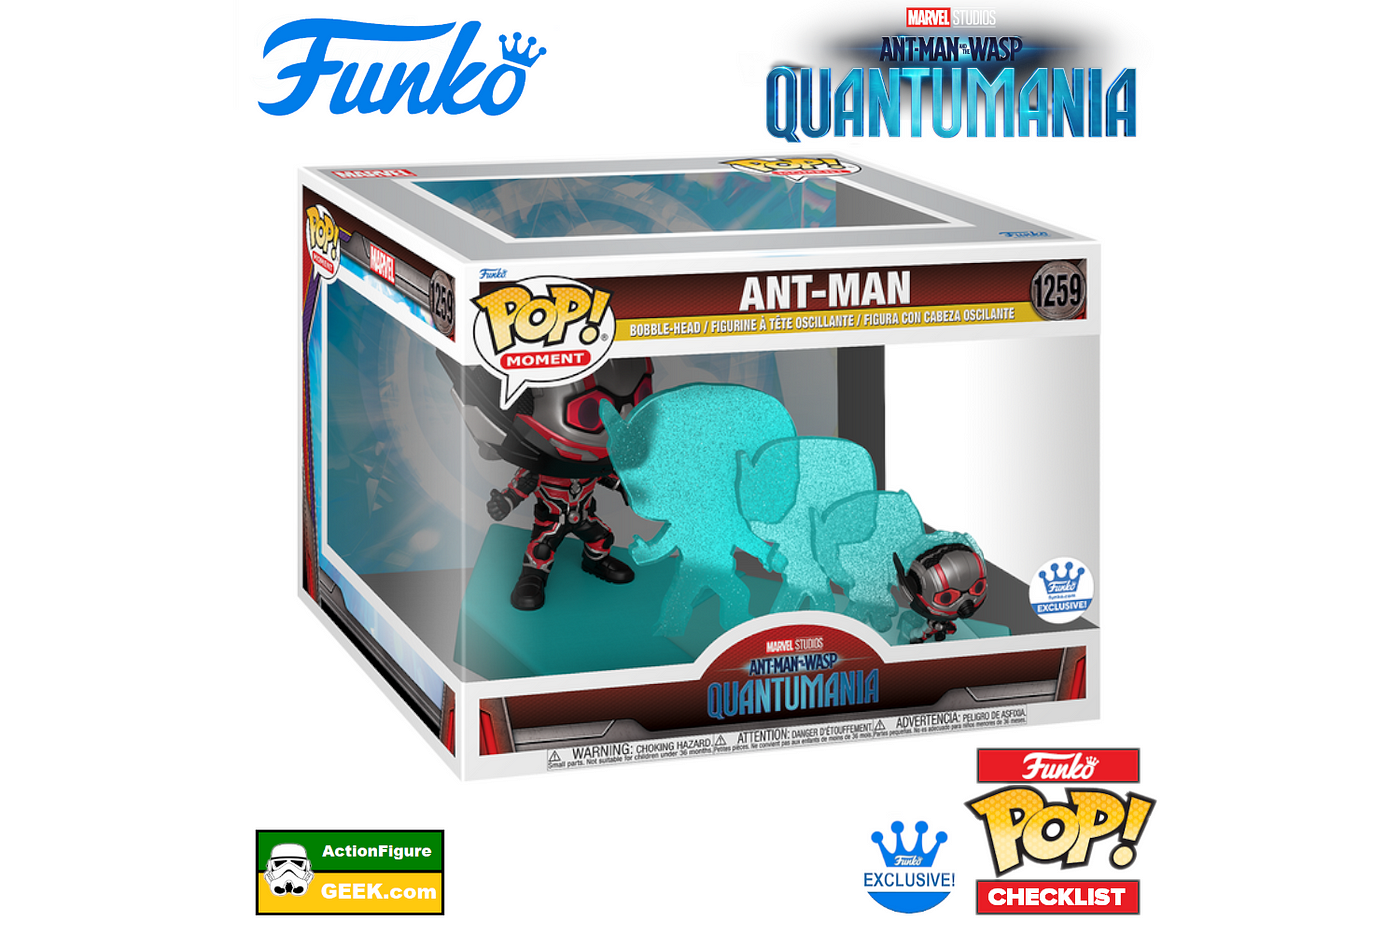 ANT-MAN AND THE WASP: QUANTUMANIA ready to burst through onto home